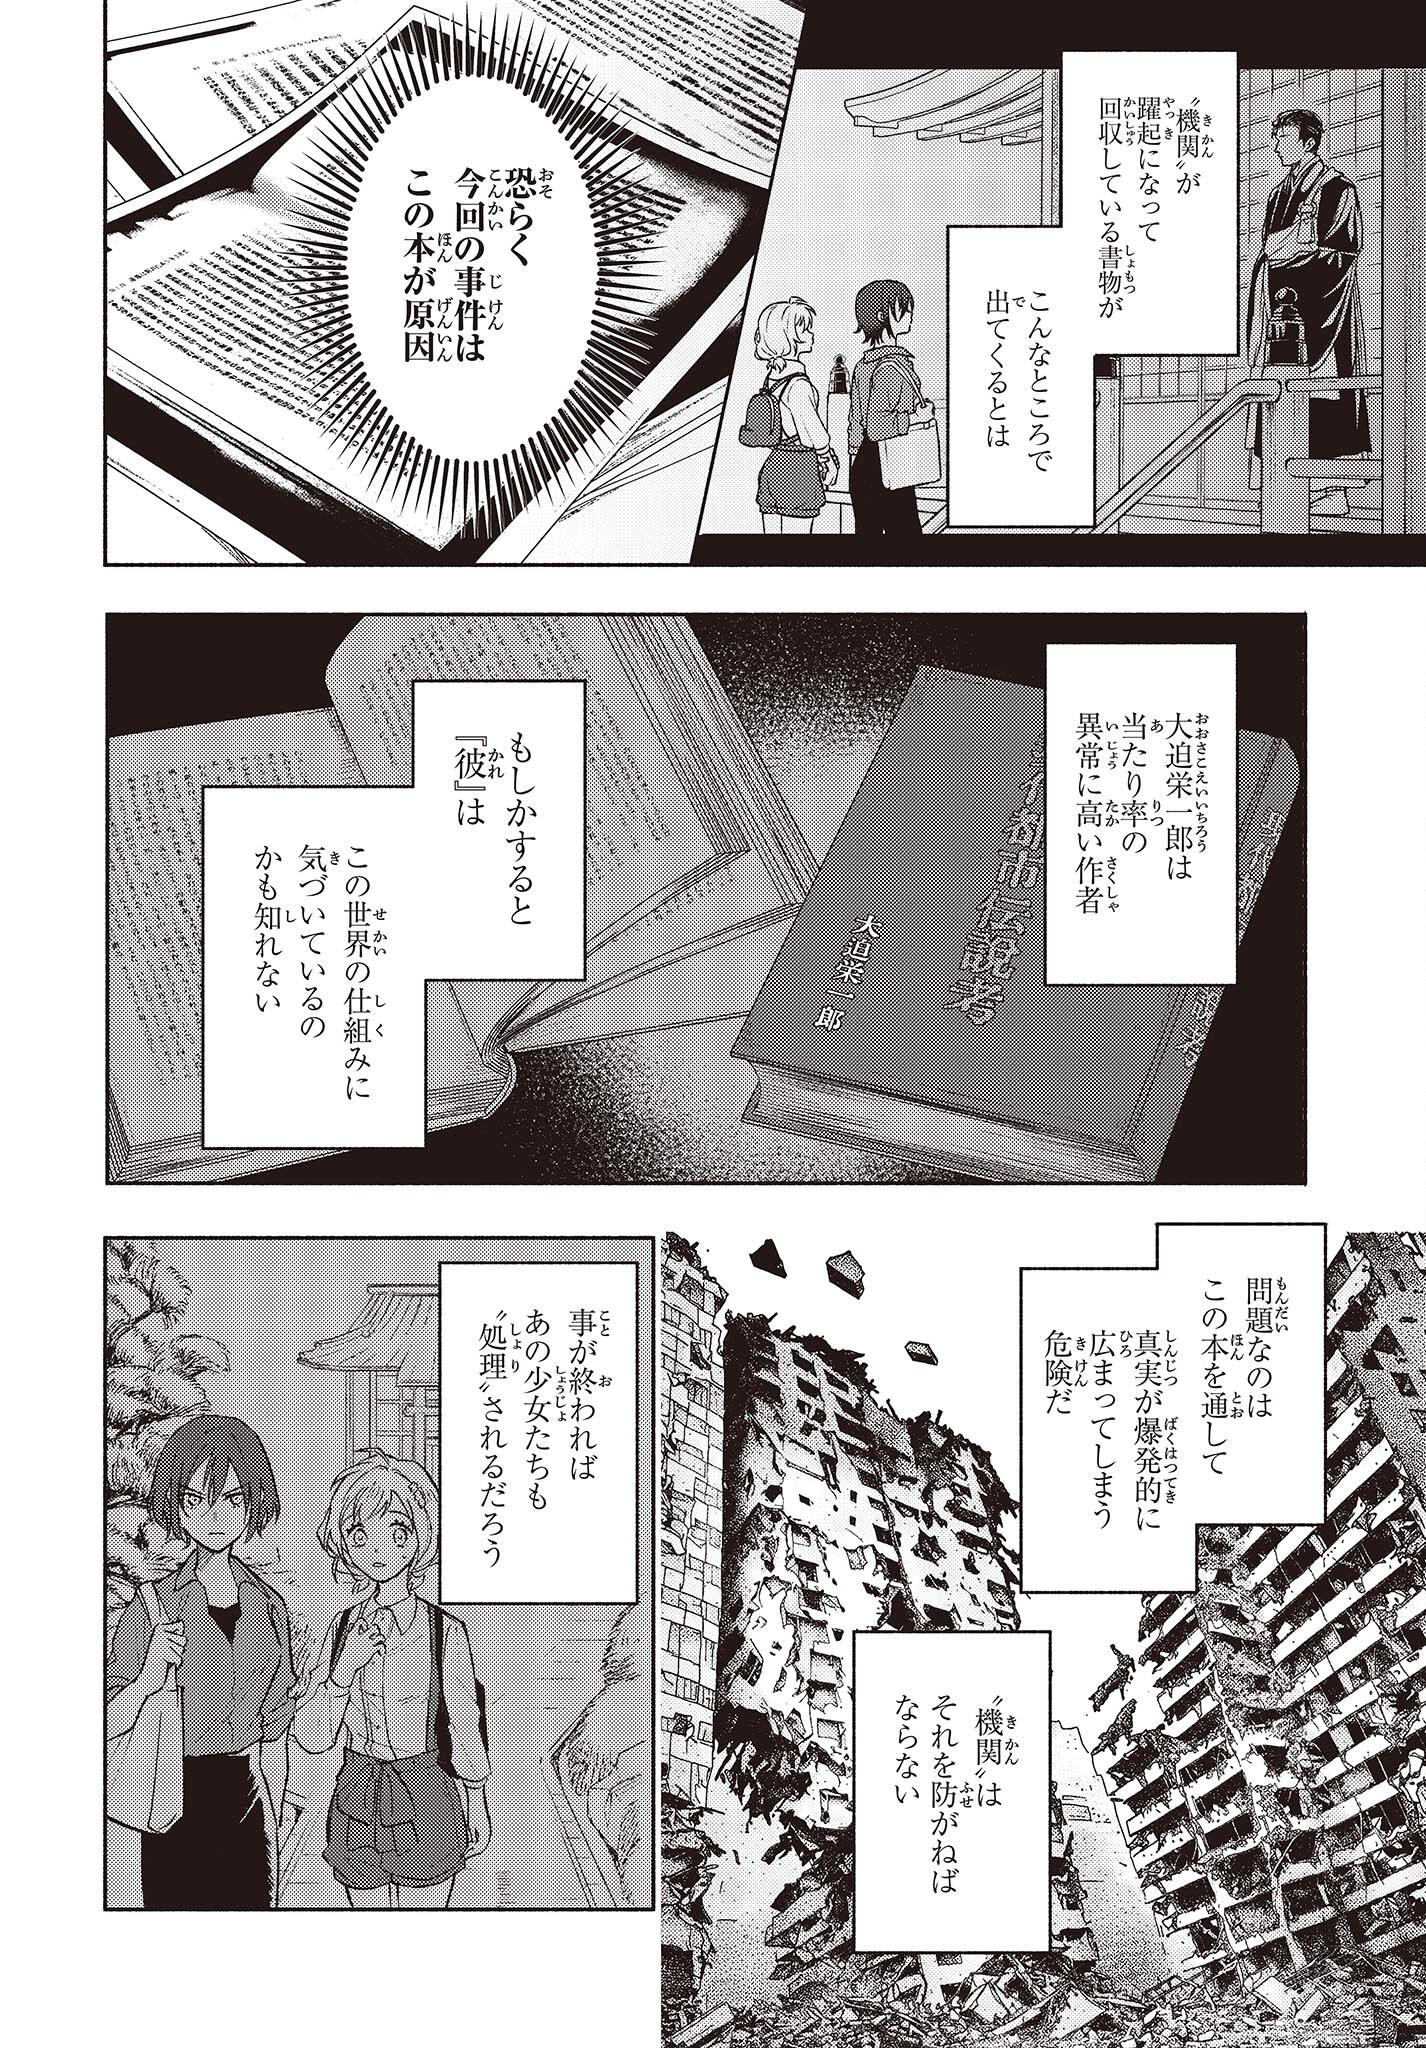 Missing 第6話 - Page 6